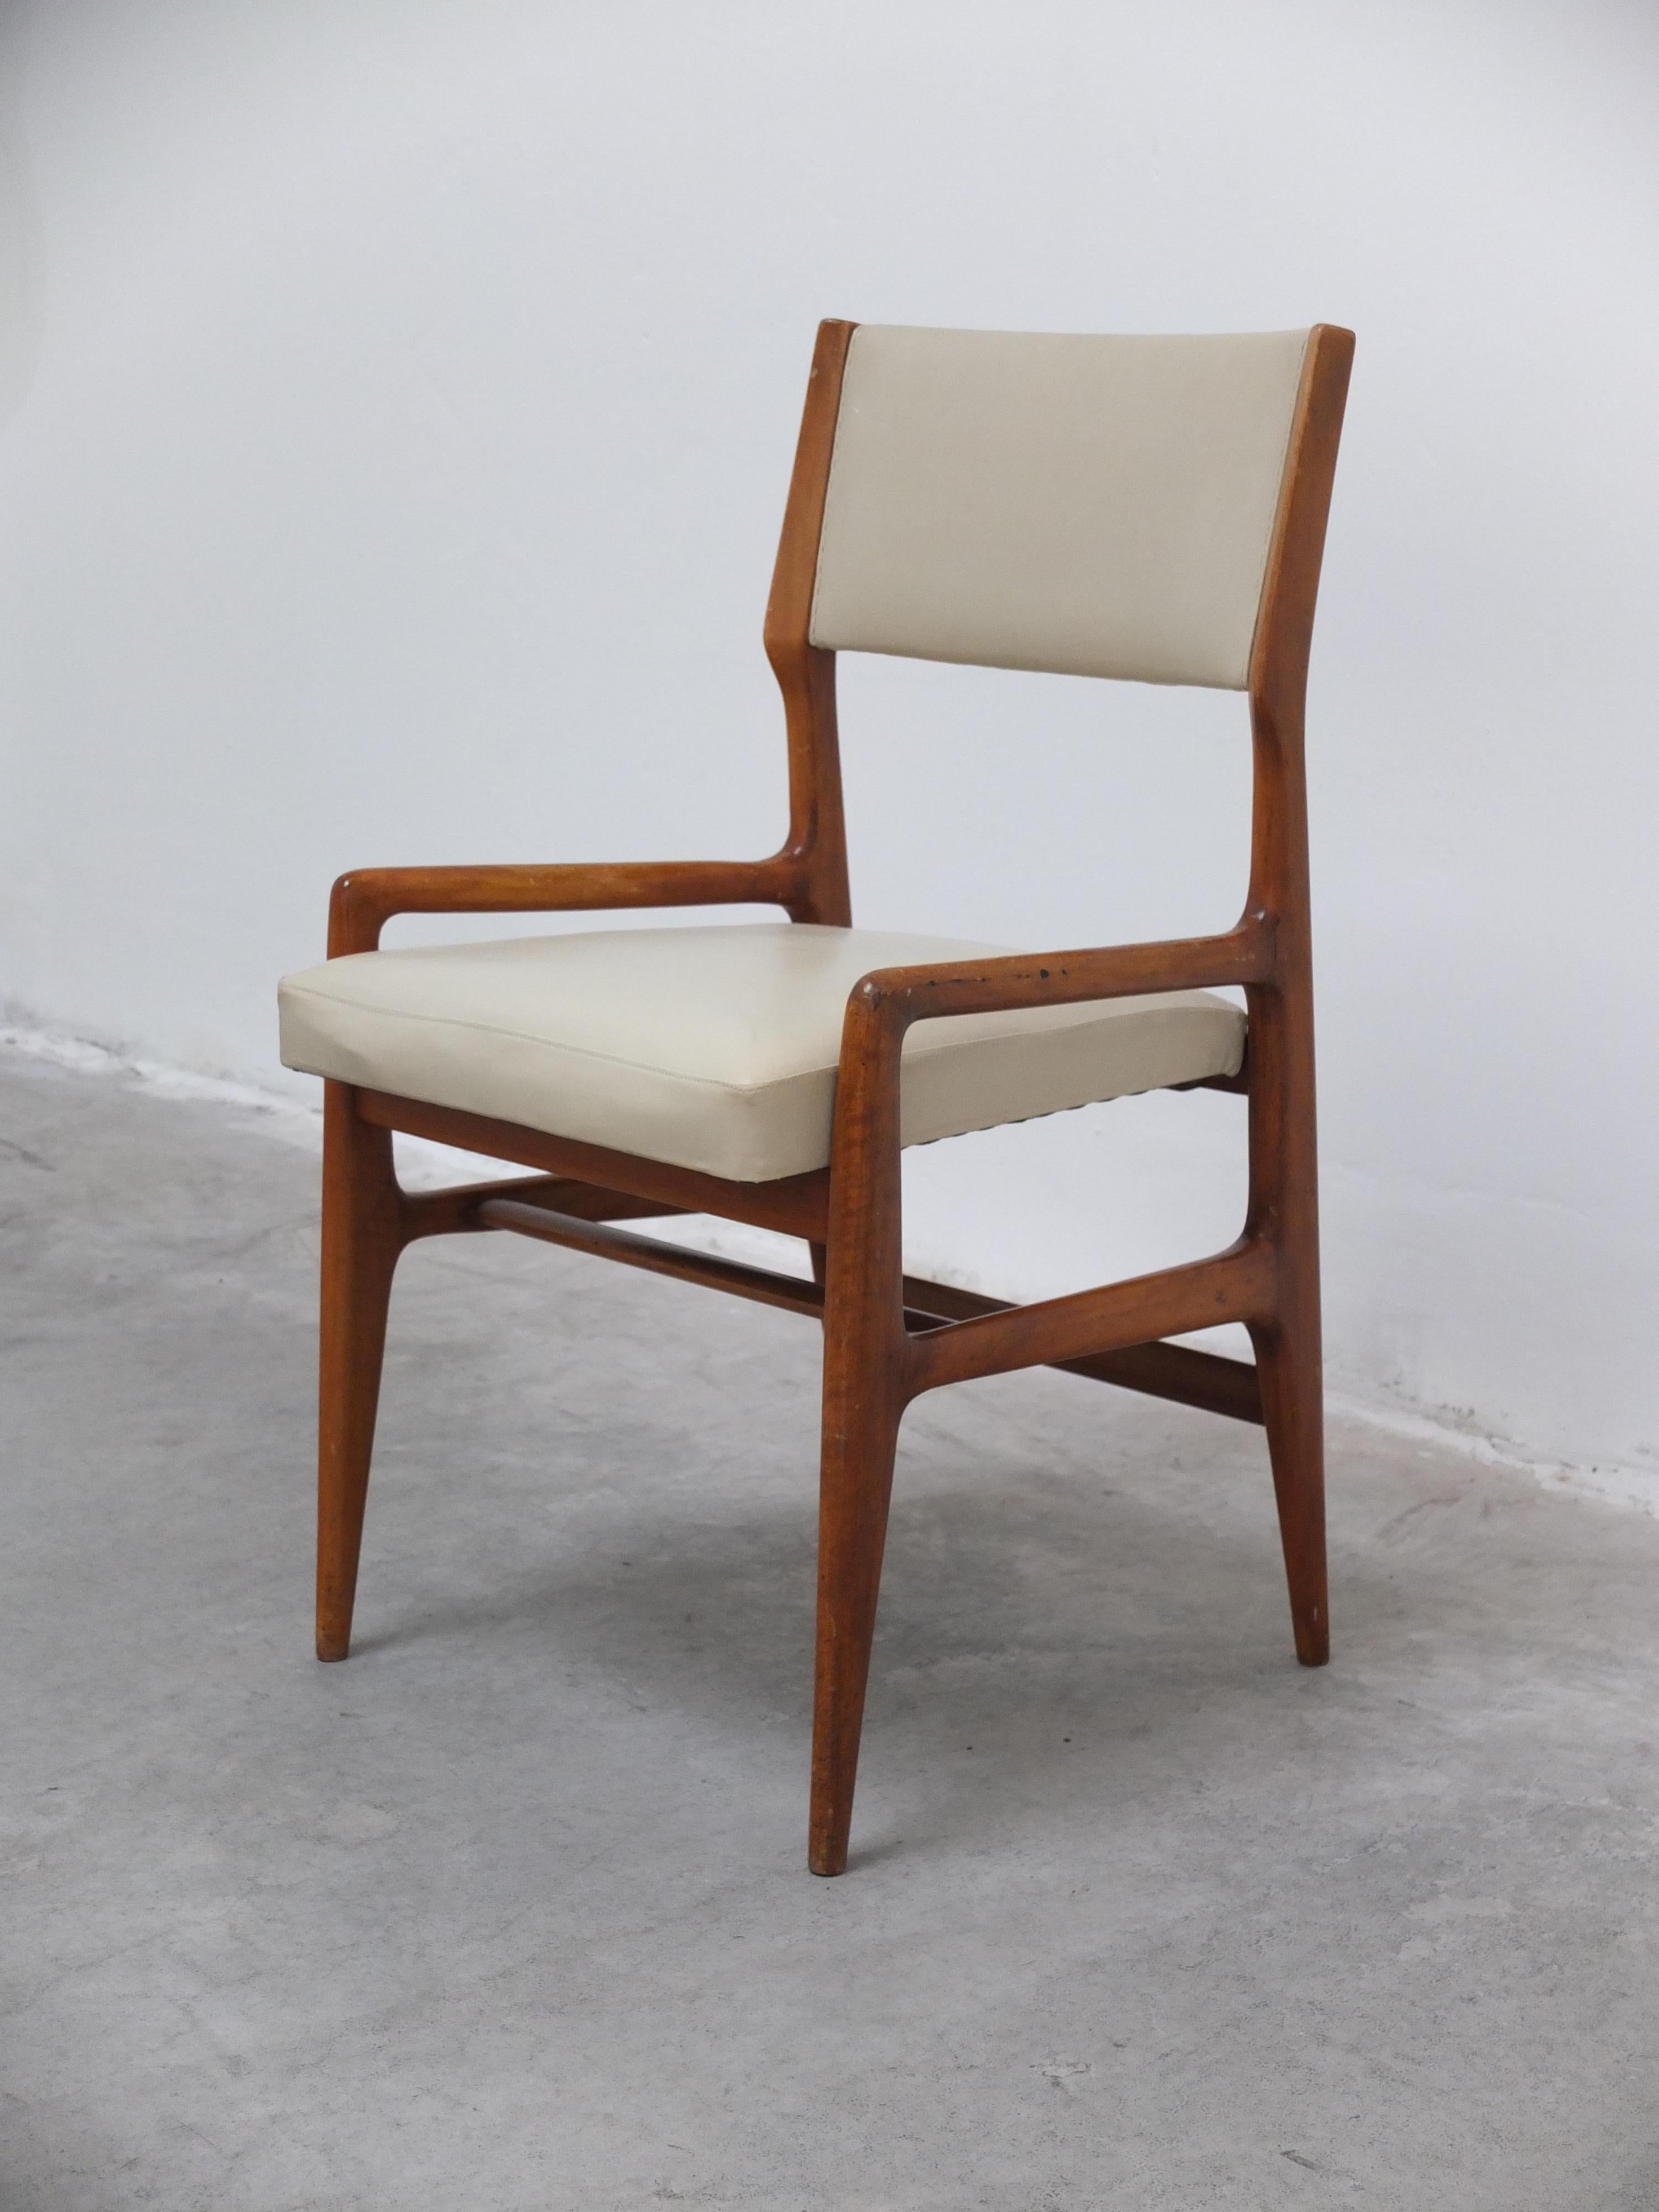 Italian Important 'Model 676' Side Chair by Gio Ponti for Cassina, 1953 For Sale